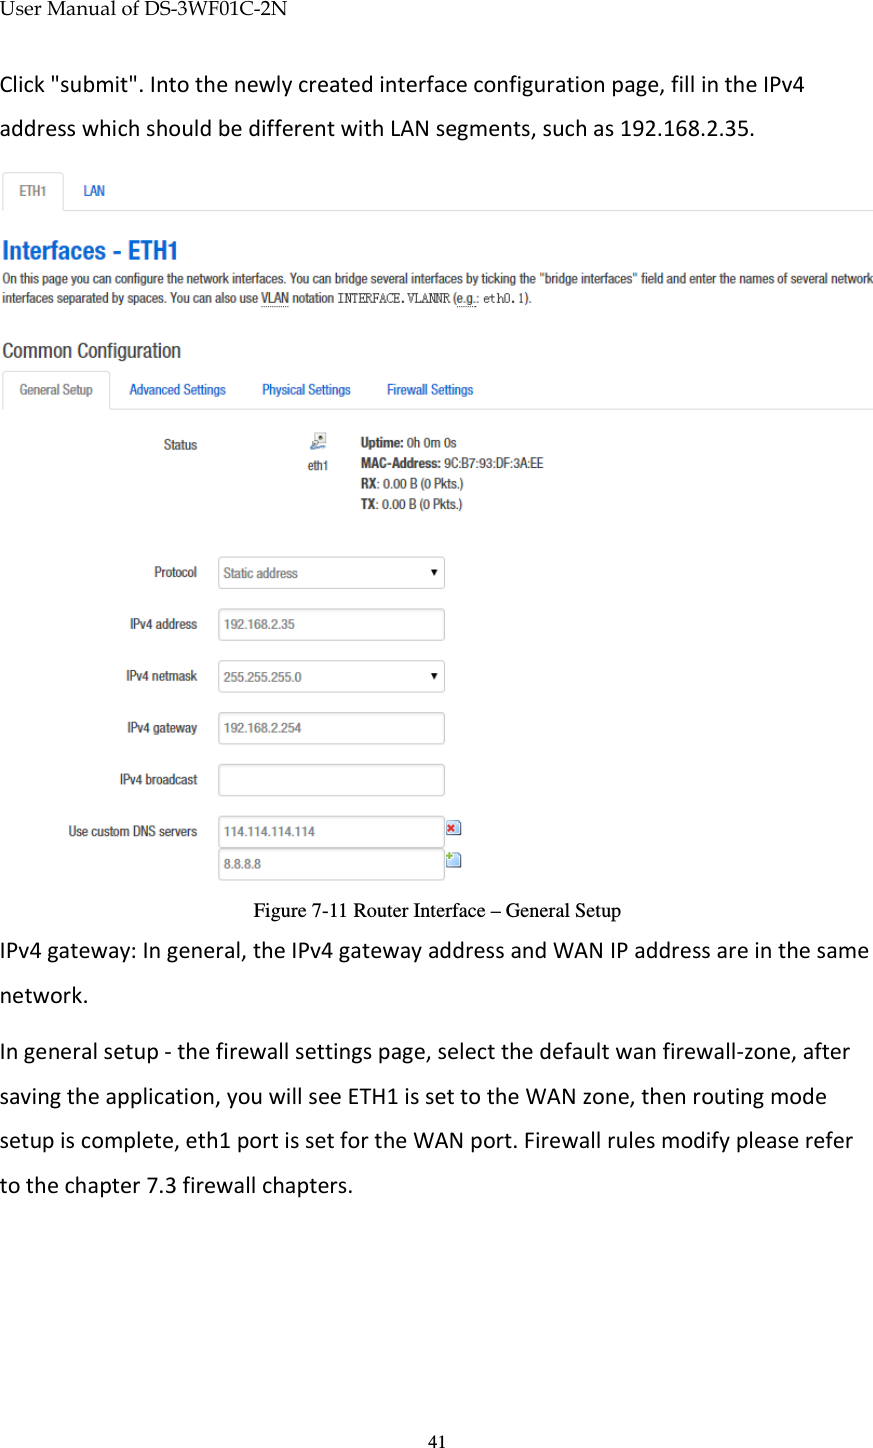 User Manual of DS-3WF01C-2N   41Click &quot;submit&quot;. Into the newly created interface configuration page, fill in the IPv4 address which should be different with LAN segments, such as 192.168.2.35.  Figure 7-11 Router Interface – General Setup IPv4 gateway: In general, the IPv4 gateway address and WAN IP address are in the same network. In general setup - the firewall settings page, select the default wan firewall-zone, after saving the application, you will see ETH1 is set to the WAN zone, then routing mode setup is complete, eth1 port is set for the WAN port. Firewall rules modify please refer to the chapter 7.3 firewall chapters. 